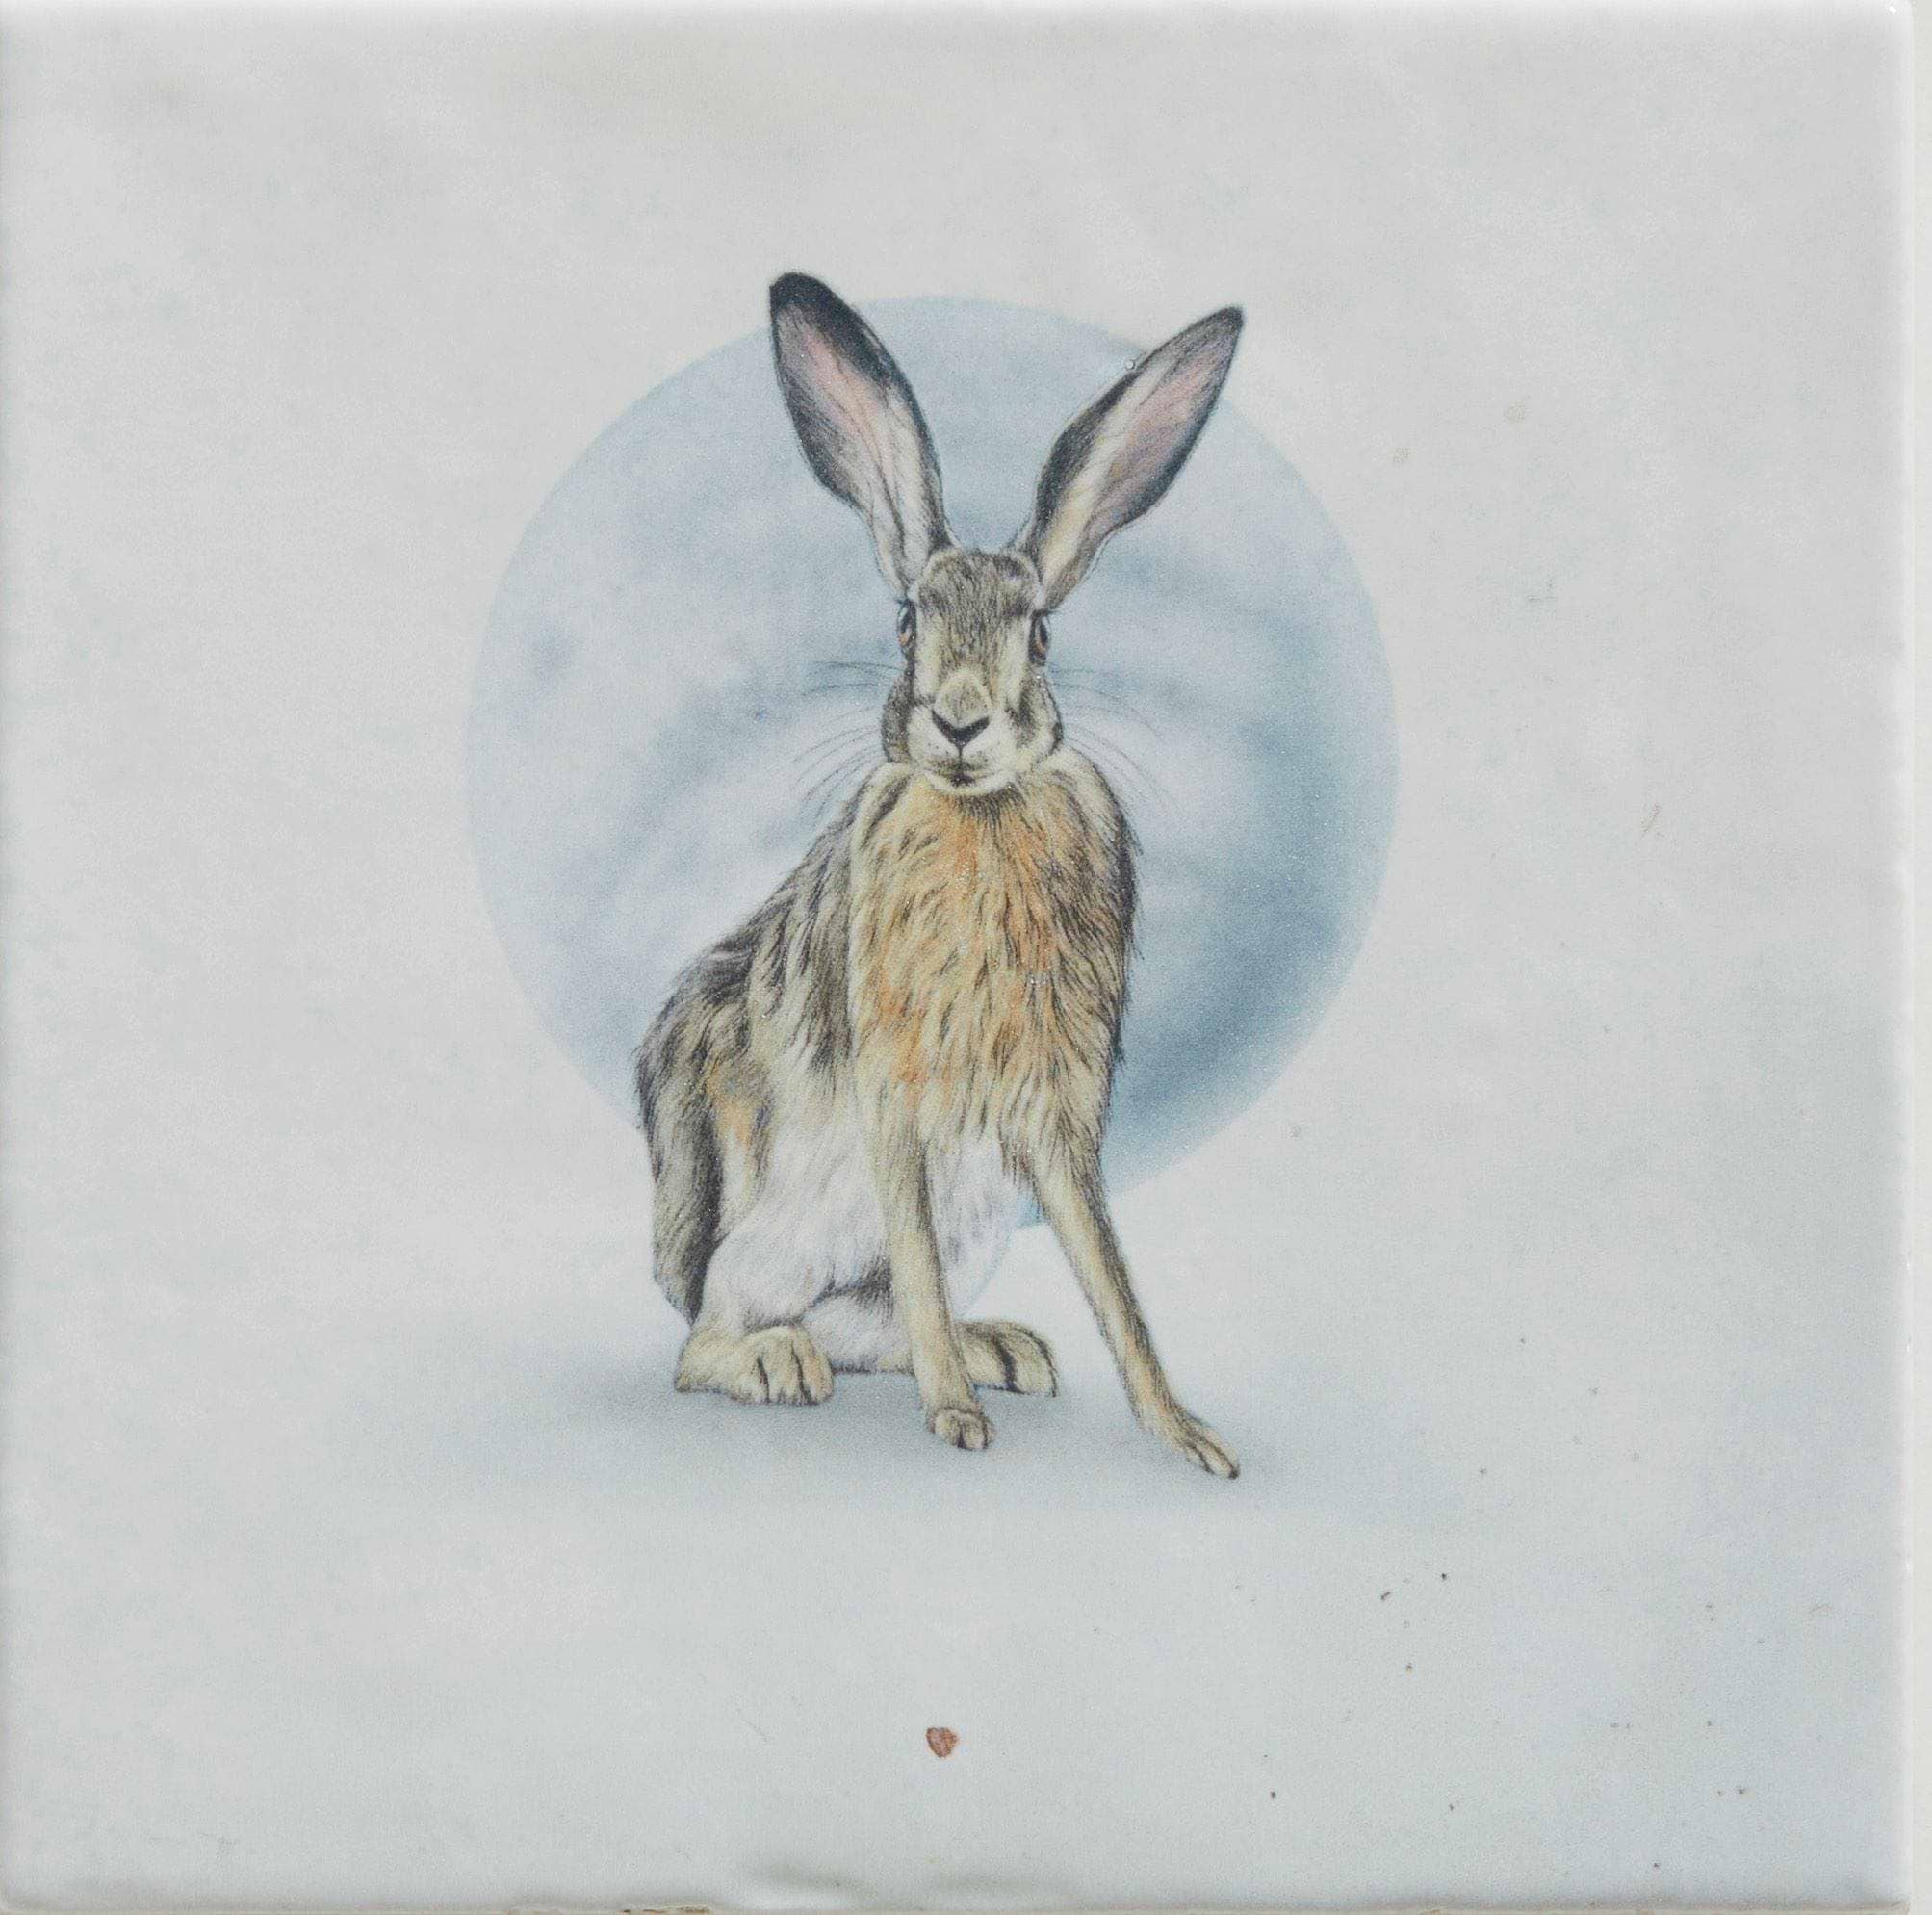 Ca’ Pietra Tiles - Ceramic Moon Backed Hare 12.5 x 12.5cm Wiltshire Hares By Joanna May